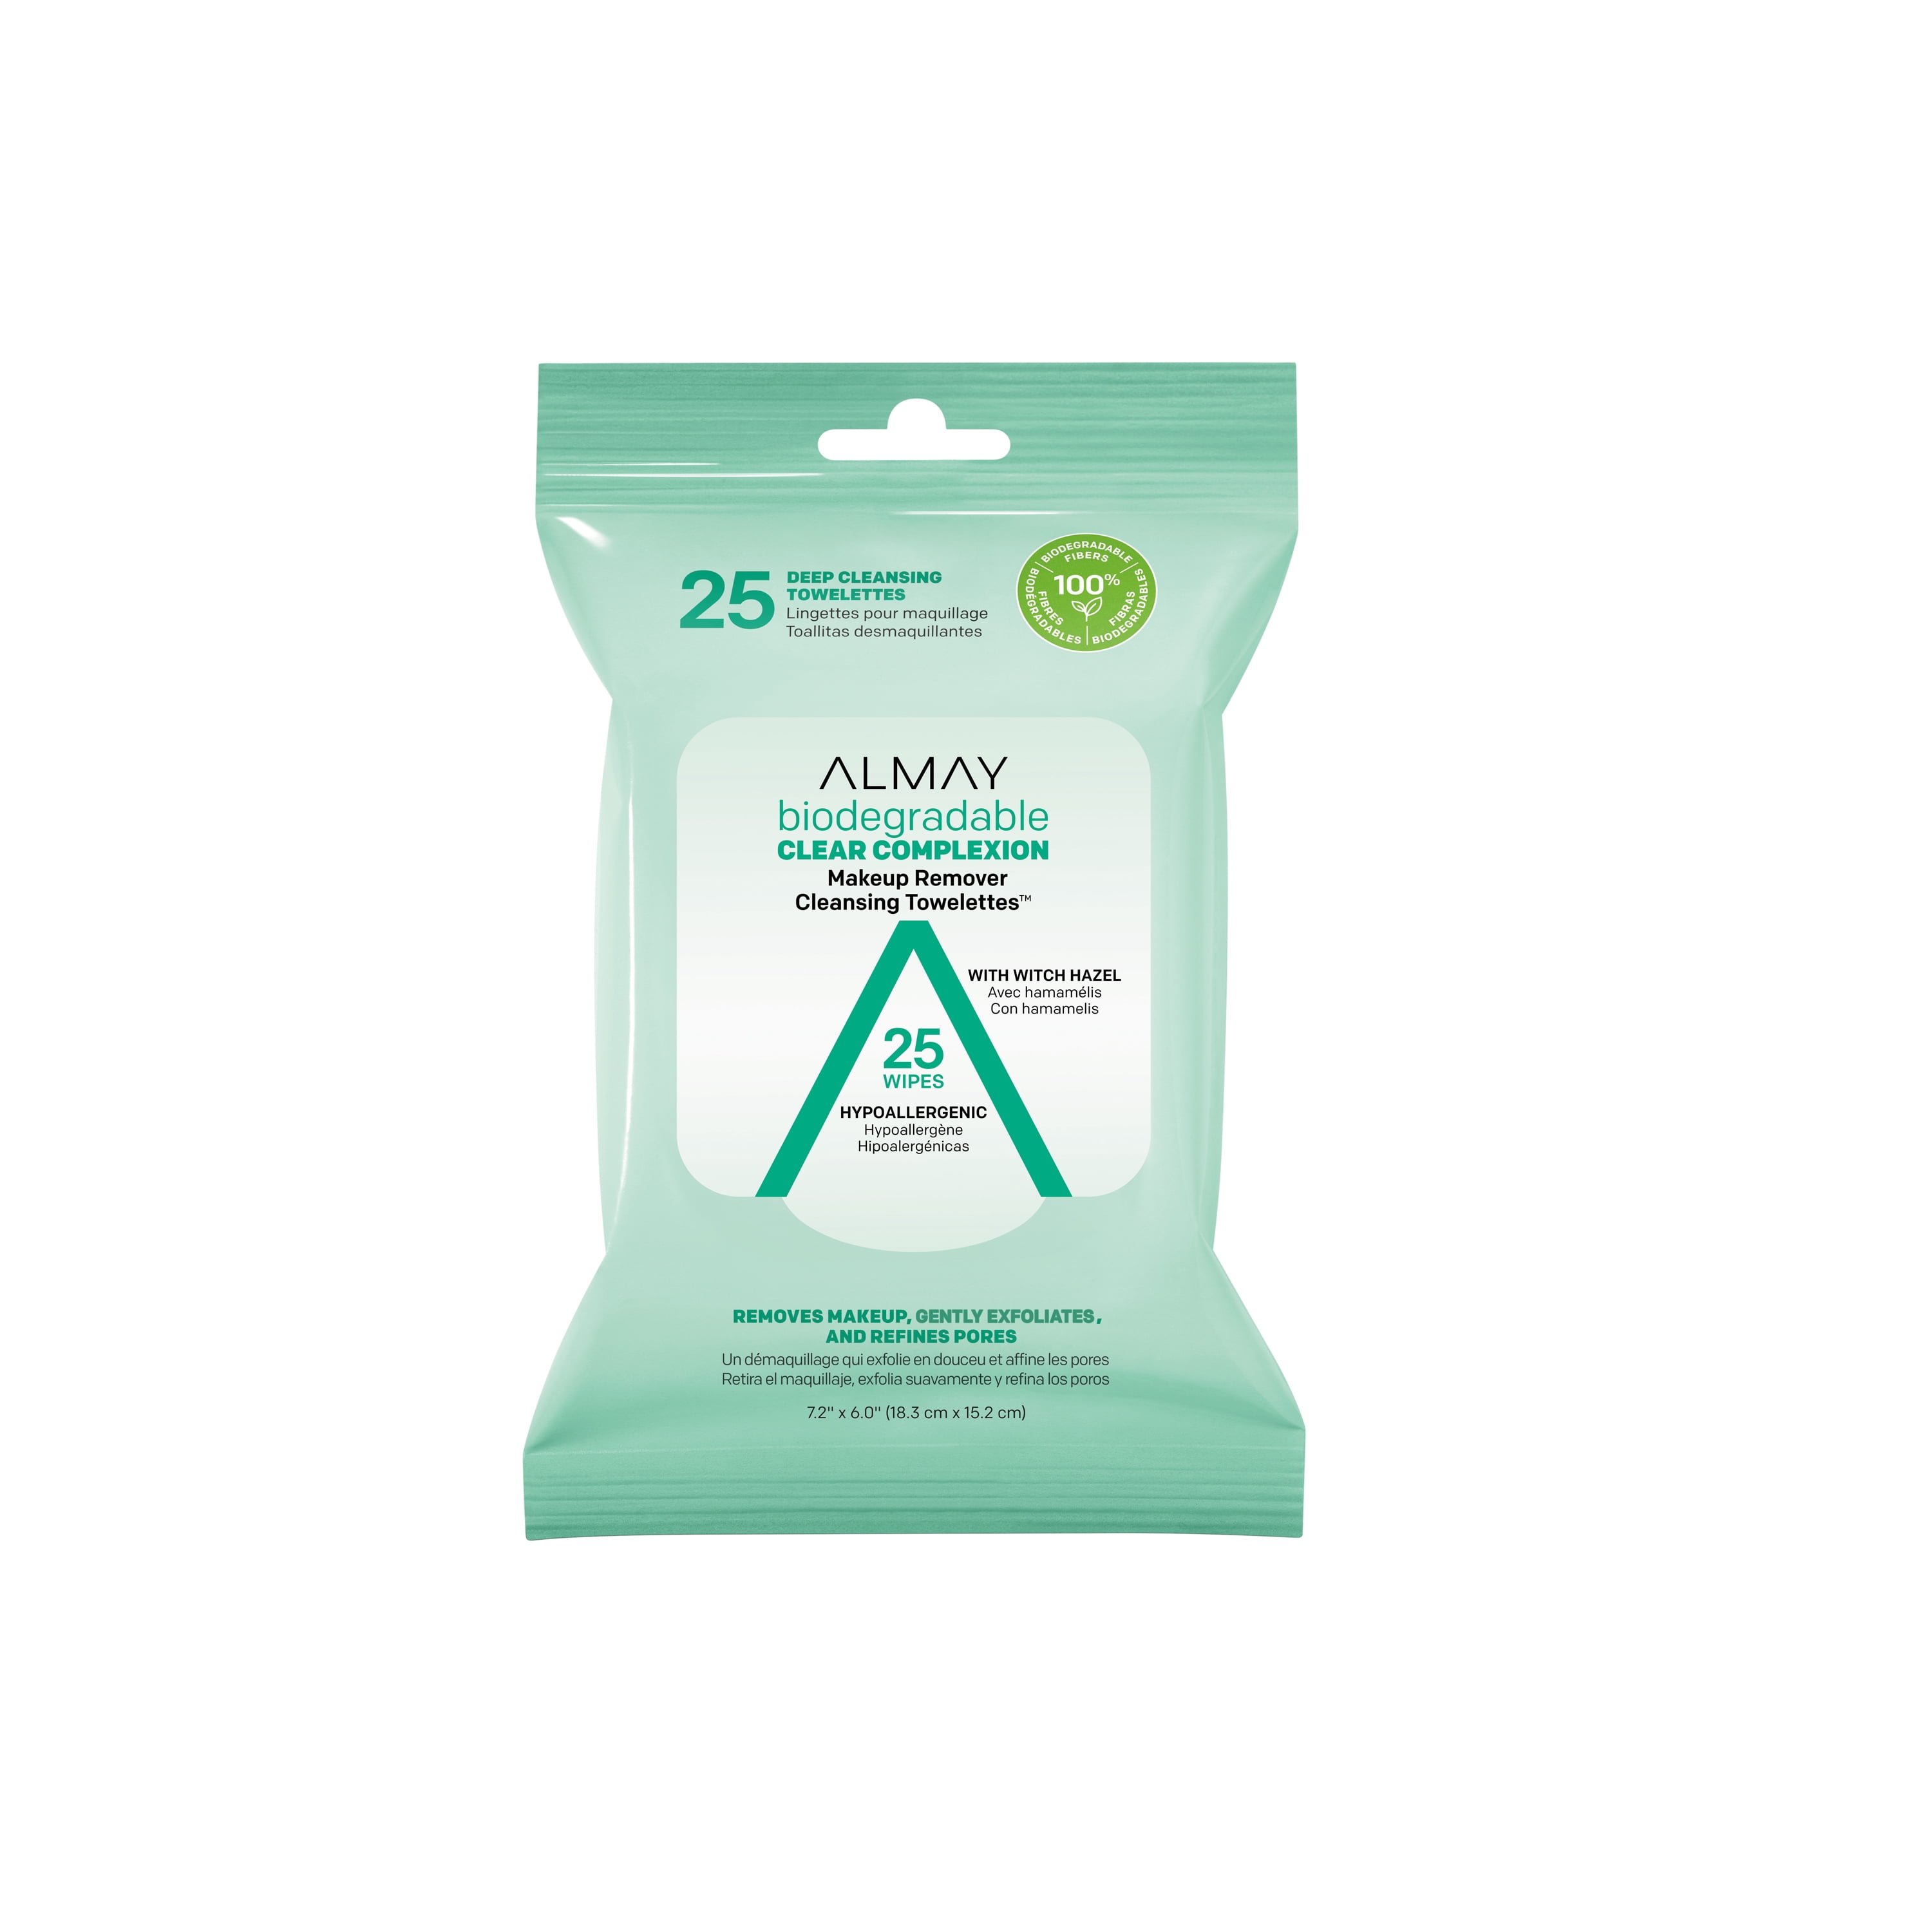 Almay Biodegradable Clear Complexion Makeup Remover Cleansing Towelettes, 25 wipes